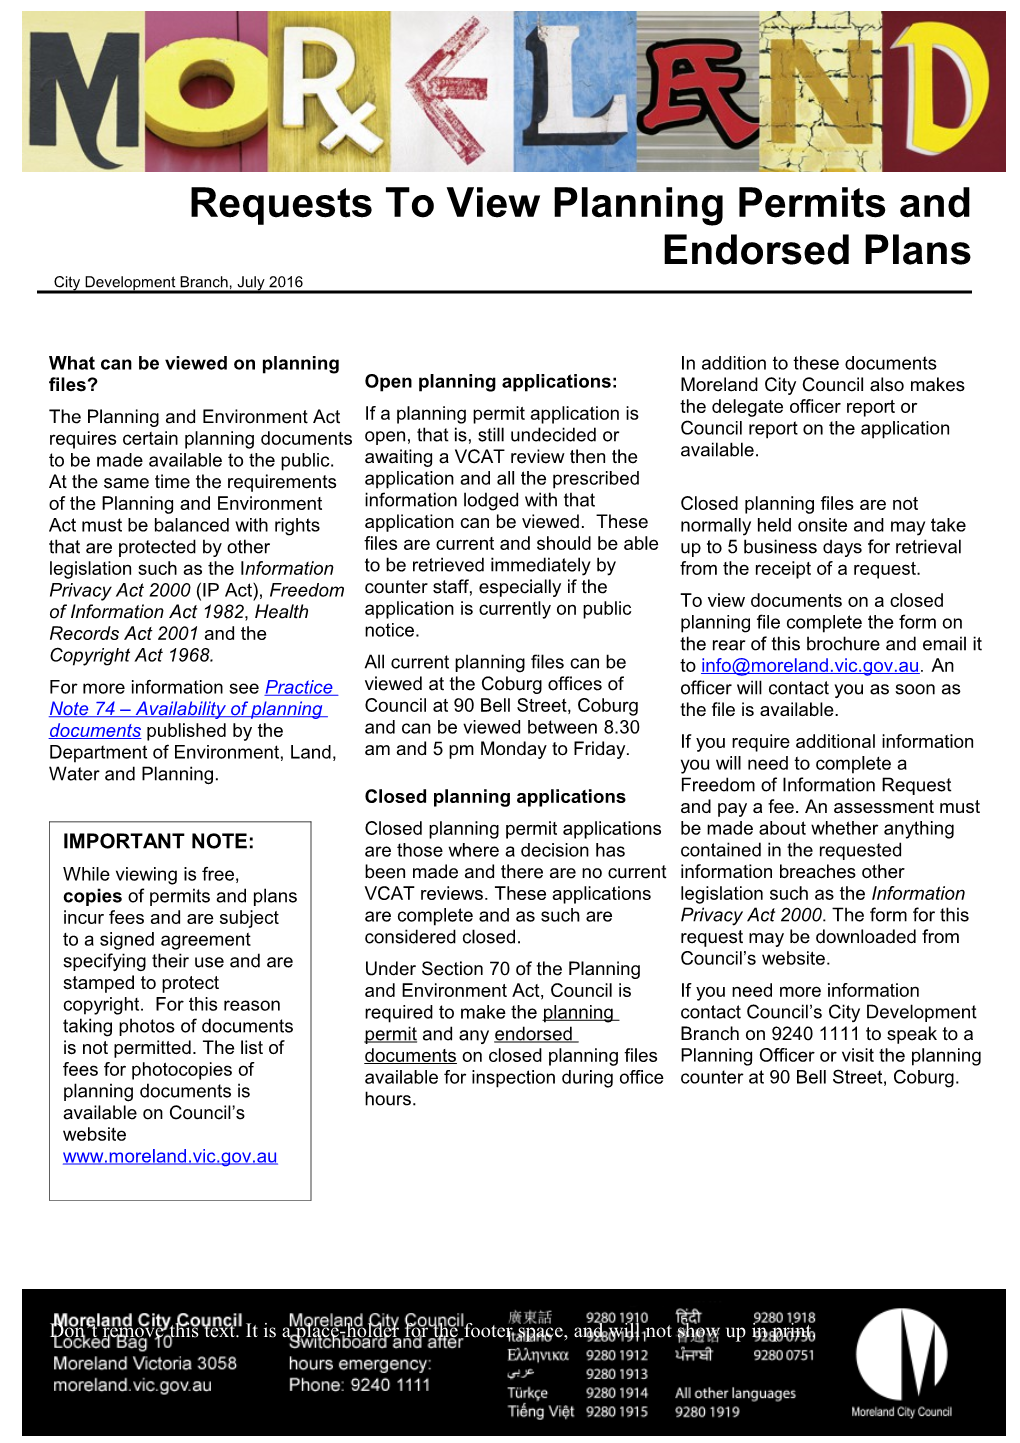 Requests to View Planning Permits Andendorsed Plans